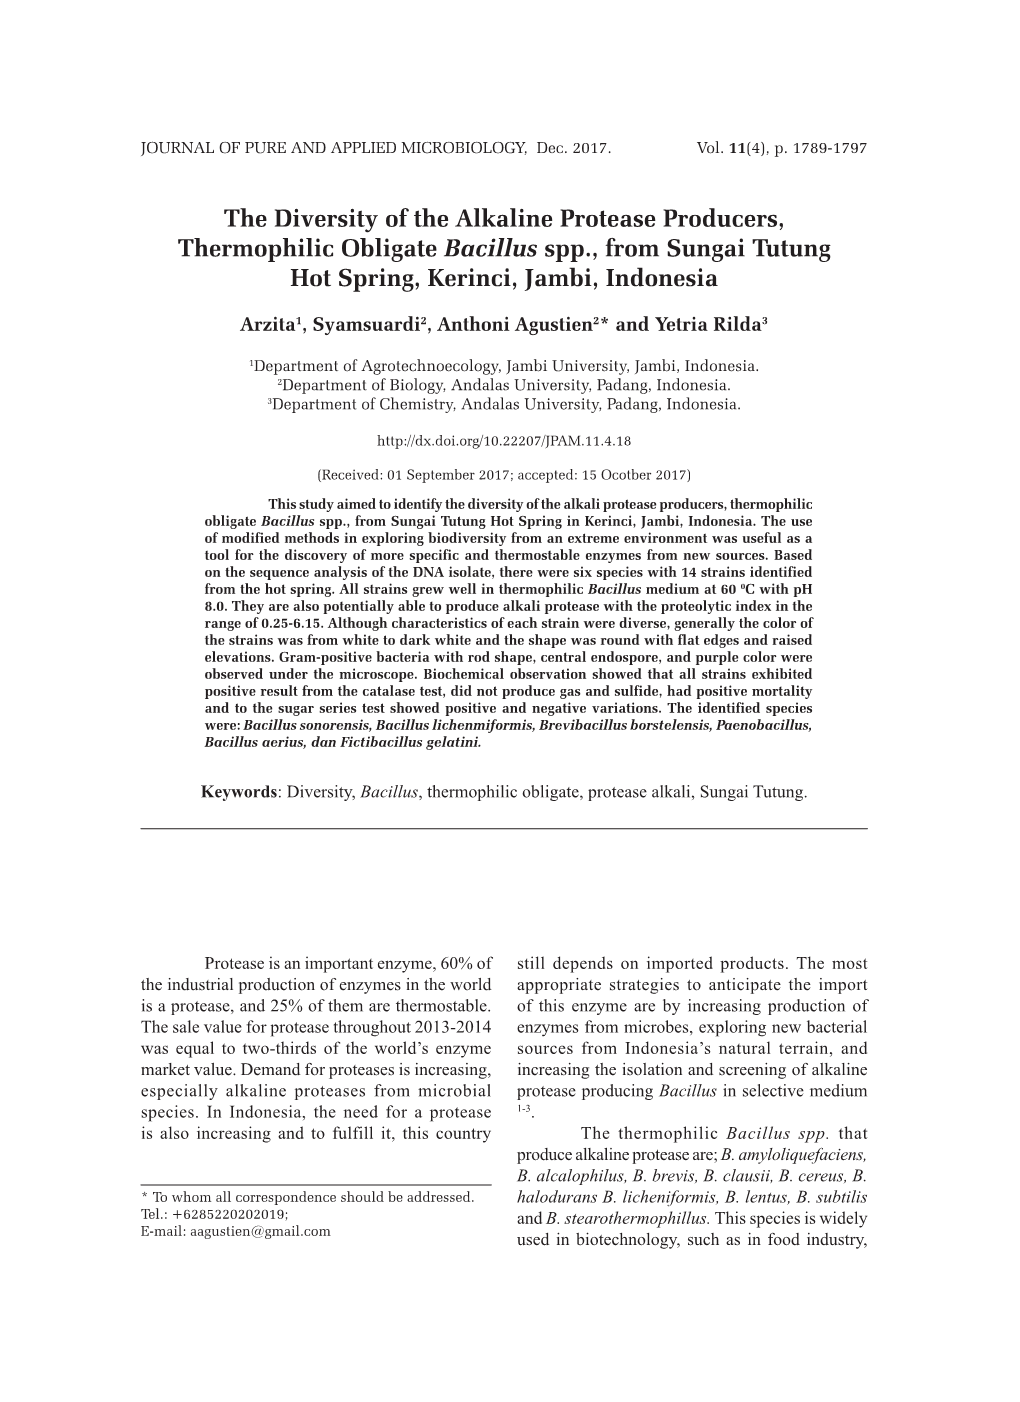 The Diversity of the Alkaline Protease Producers, Thermophilic Obligate Bacillus Spp., from Sungai Tutung Hot Spring, Kerinci, Jambi, Indonesia